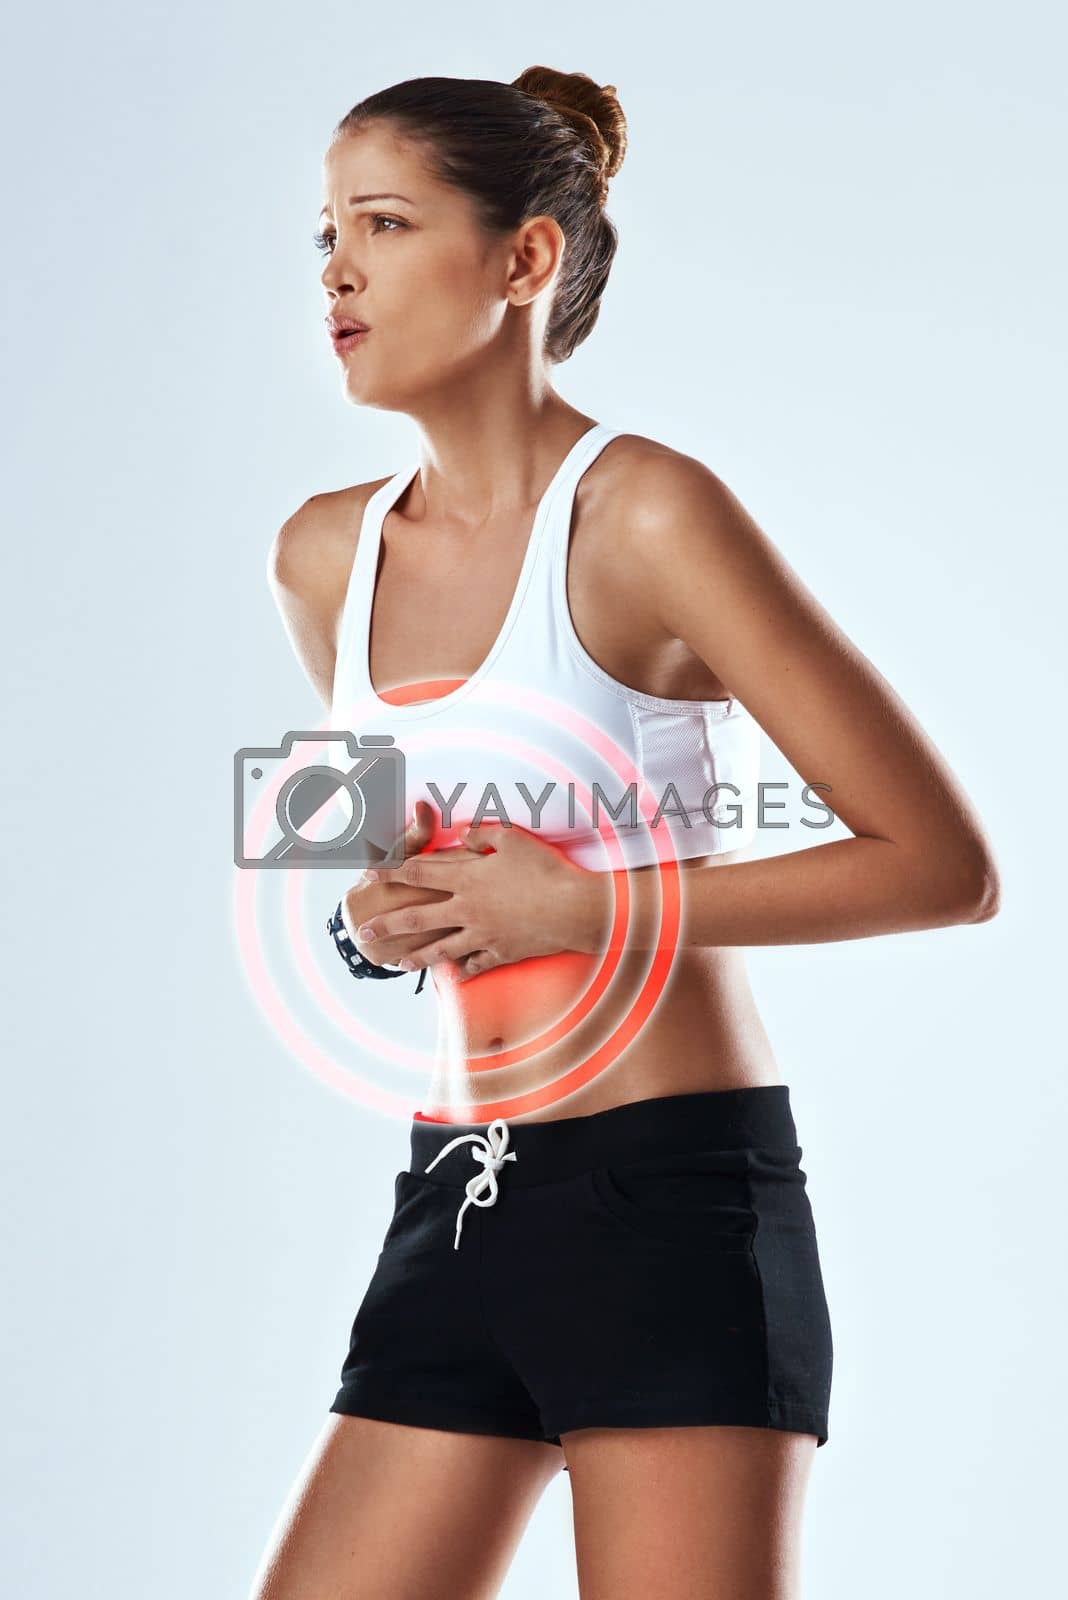 Royalty free image of Her stomach is in knots. Studio shot of an athletic young woman holding her stomach in pain against a grey background. by YuriArcurs